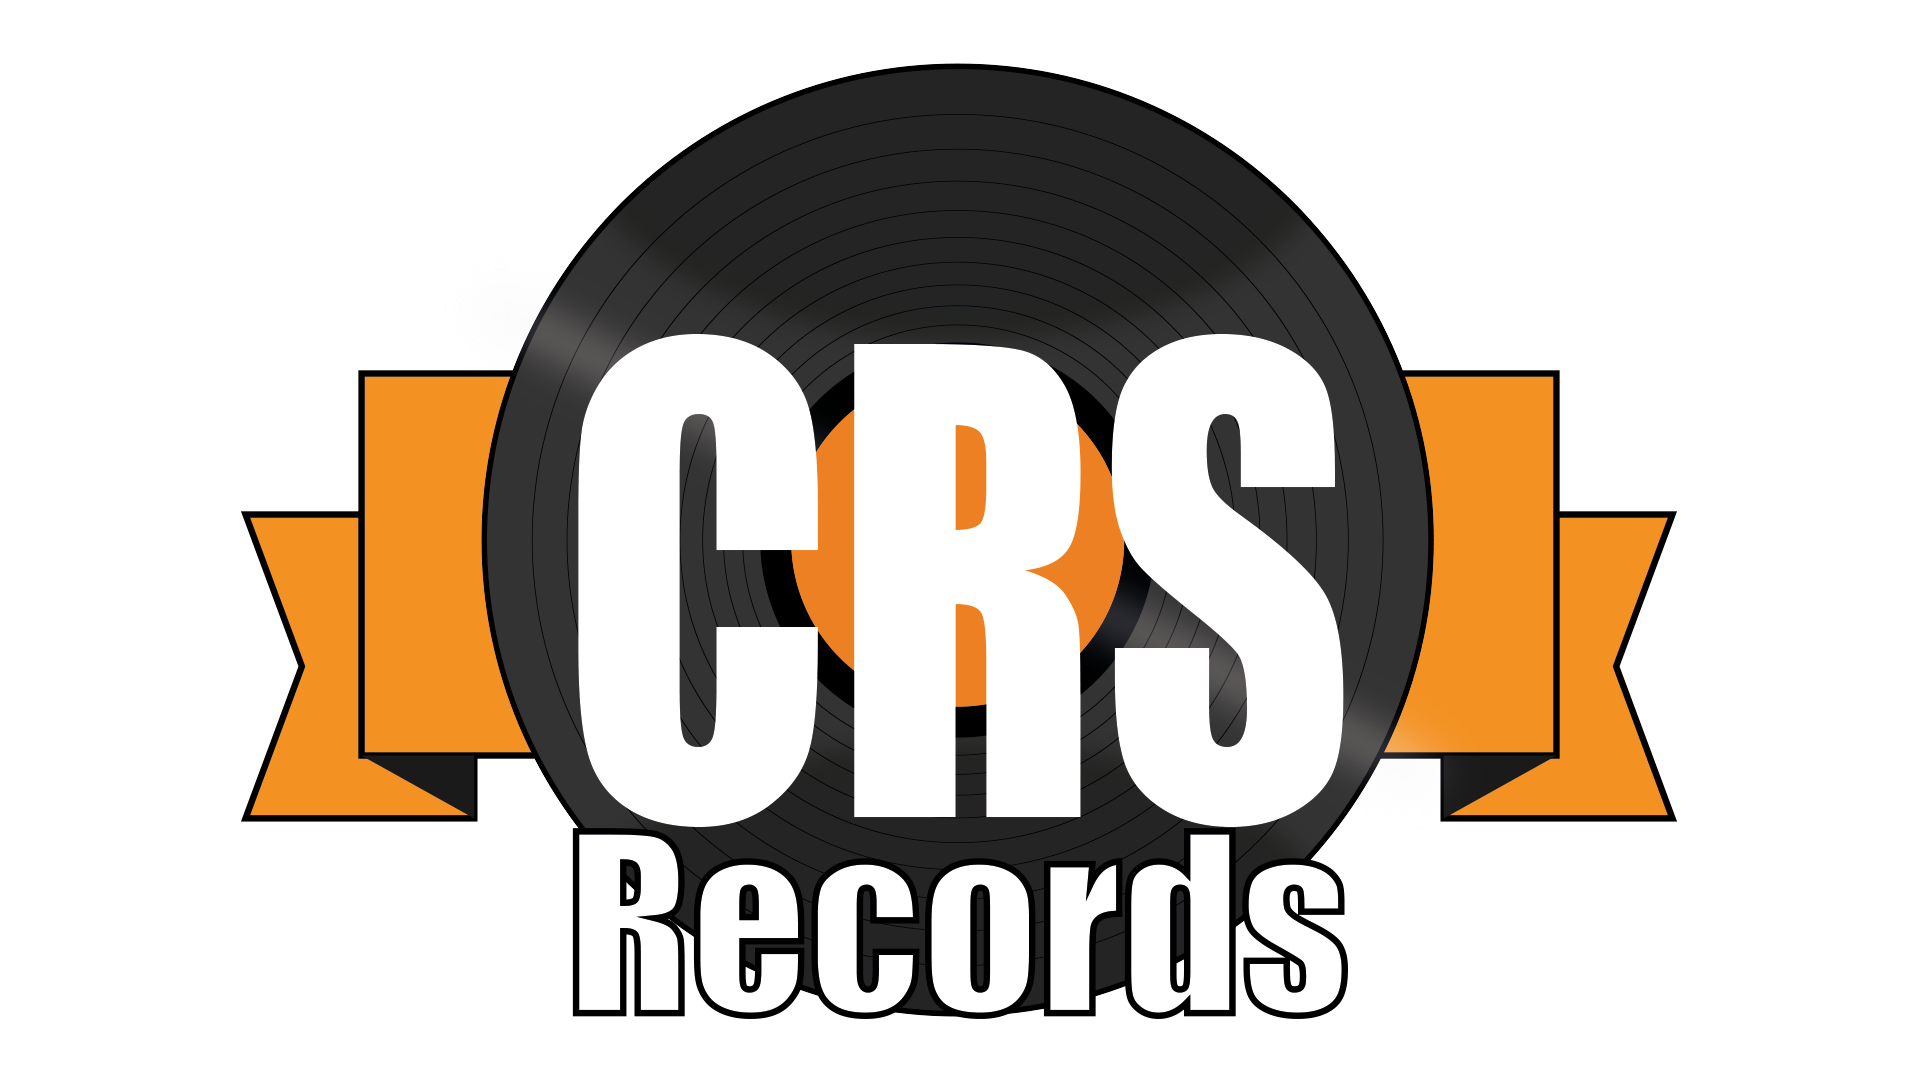 CRS Records